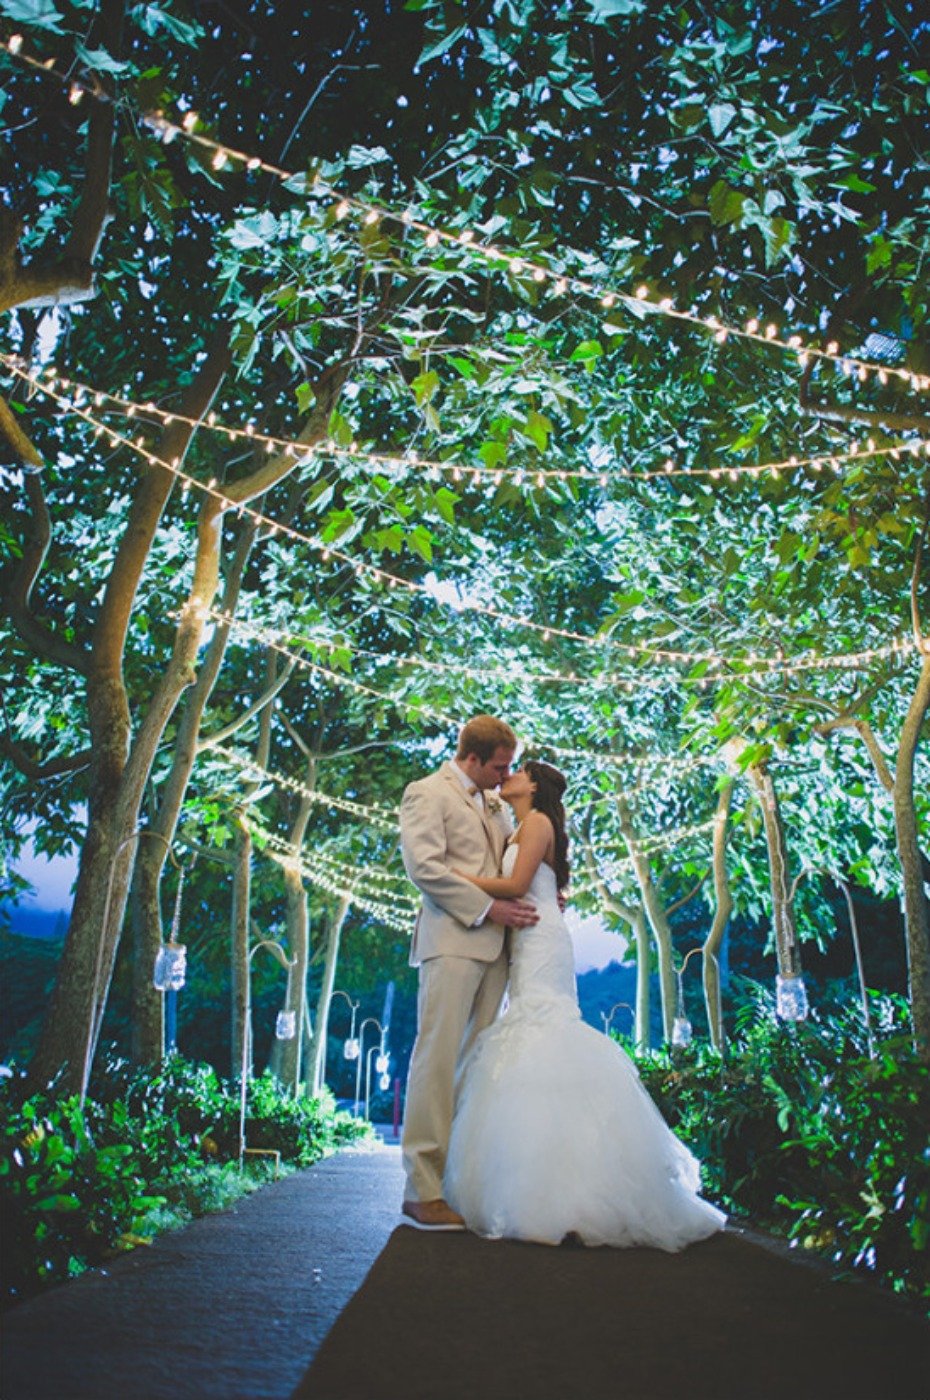 twinkle lights for your wedding night